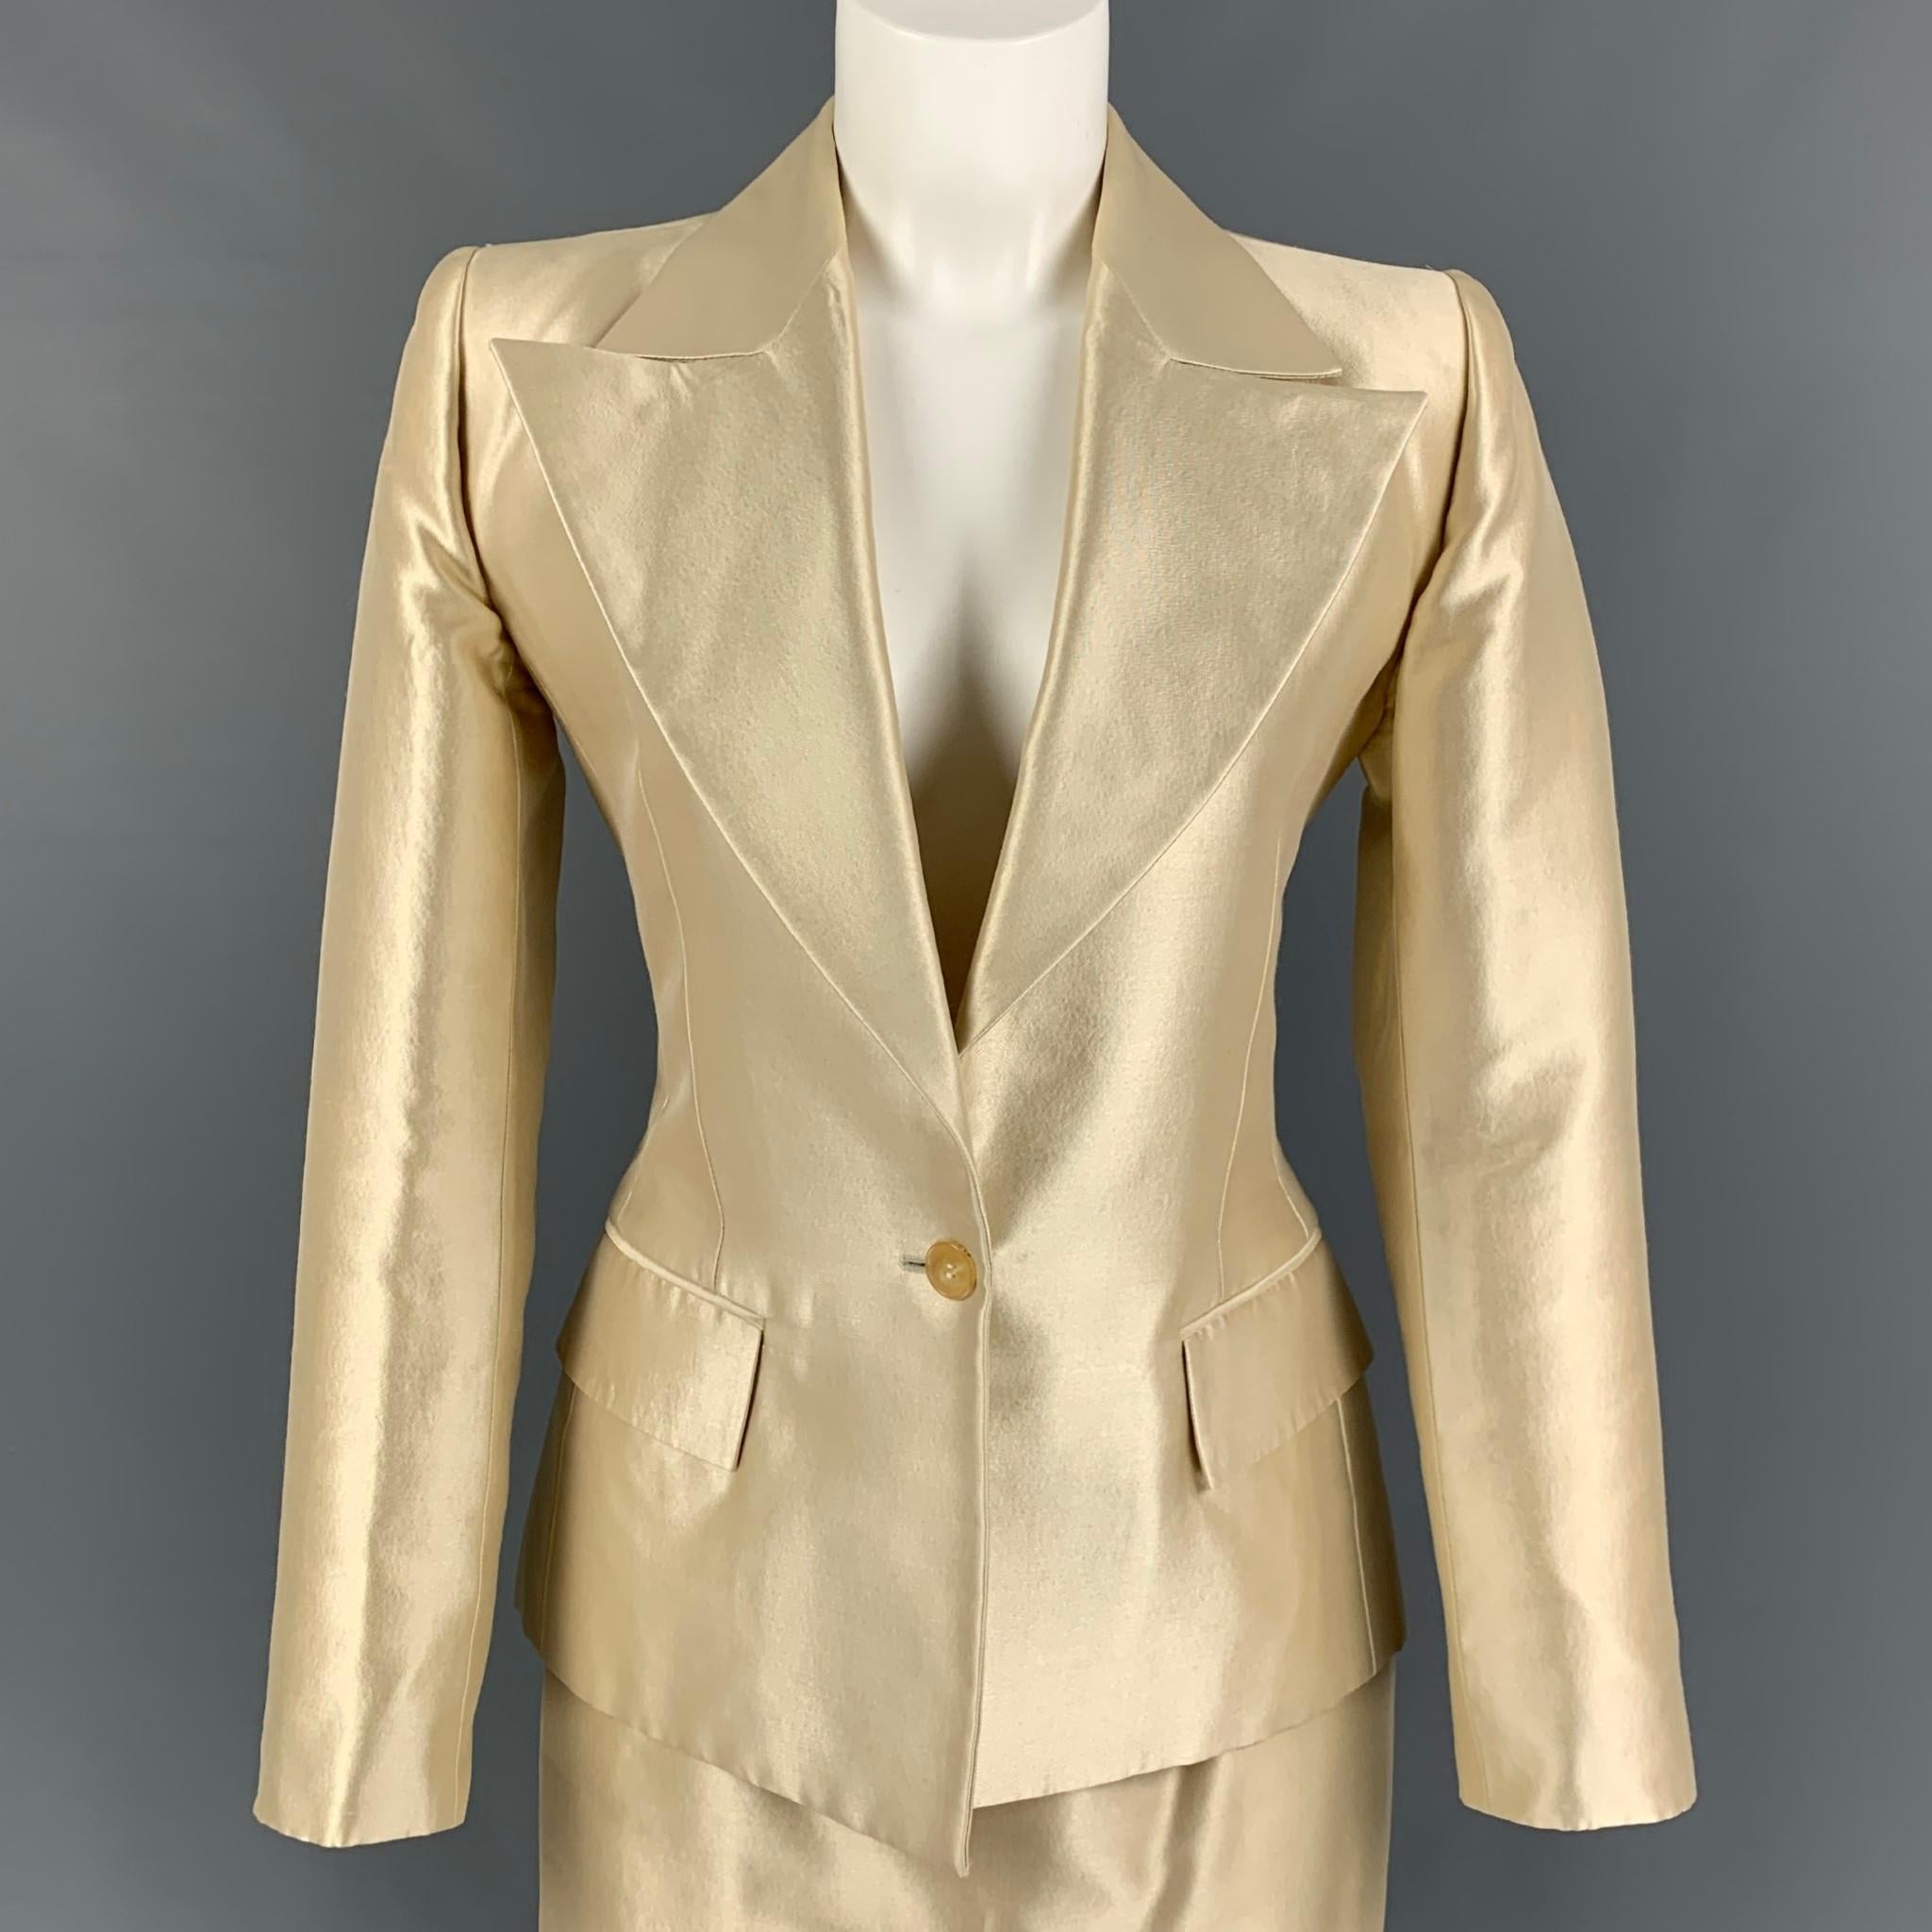 Vintage YVES SAINT LAURENT skirt suit comes in a cream wool / silk with a full liner featuring a large peak lapel, flap pockets, single back vent, single button closure, and a matching pencil skirt. Made in France. 

Very Good Pre-Owned Condition.